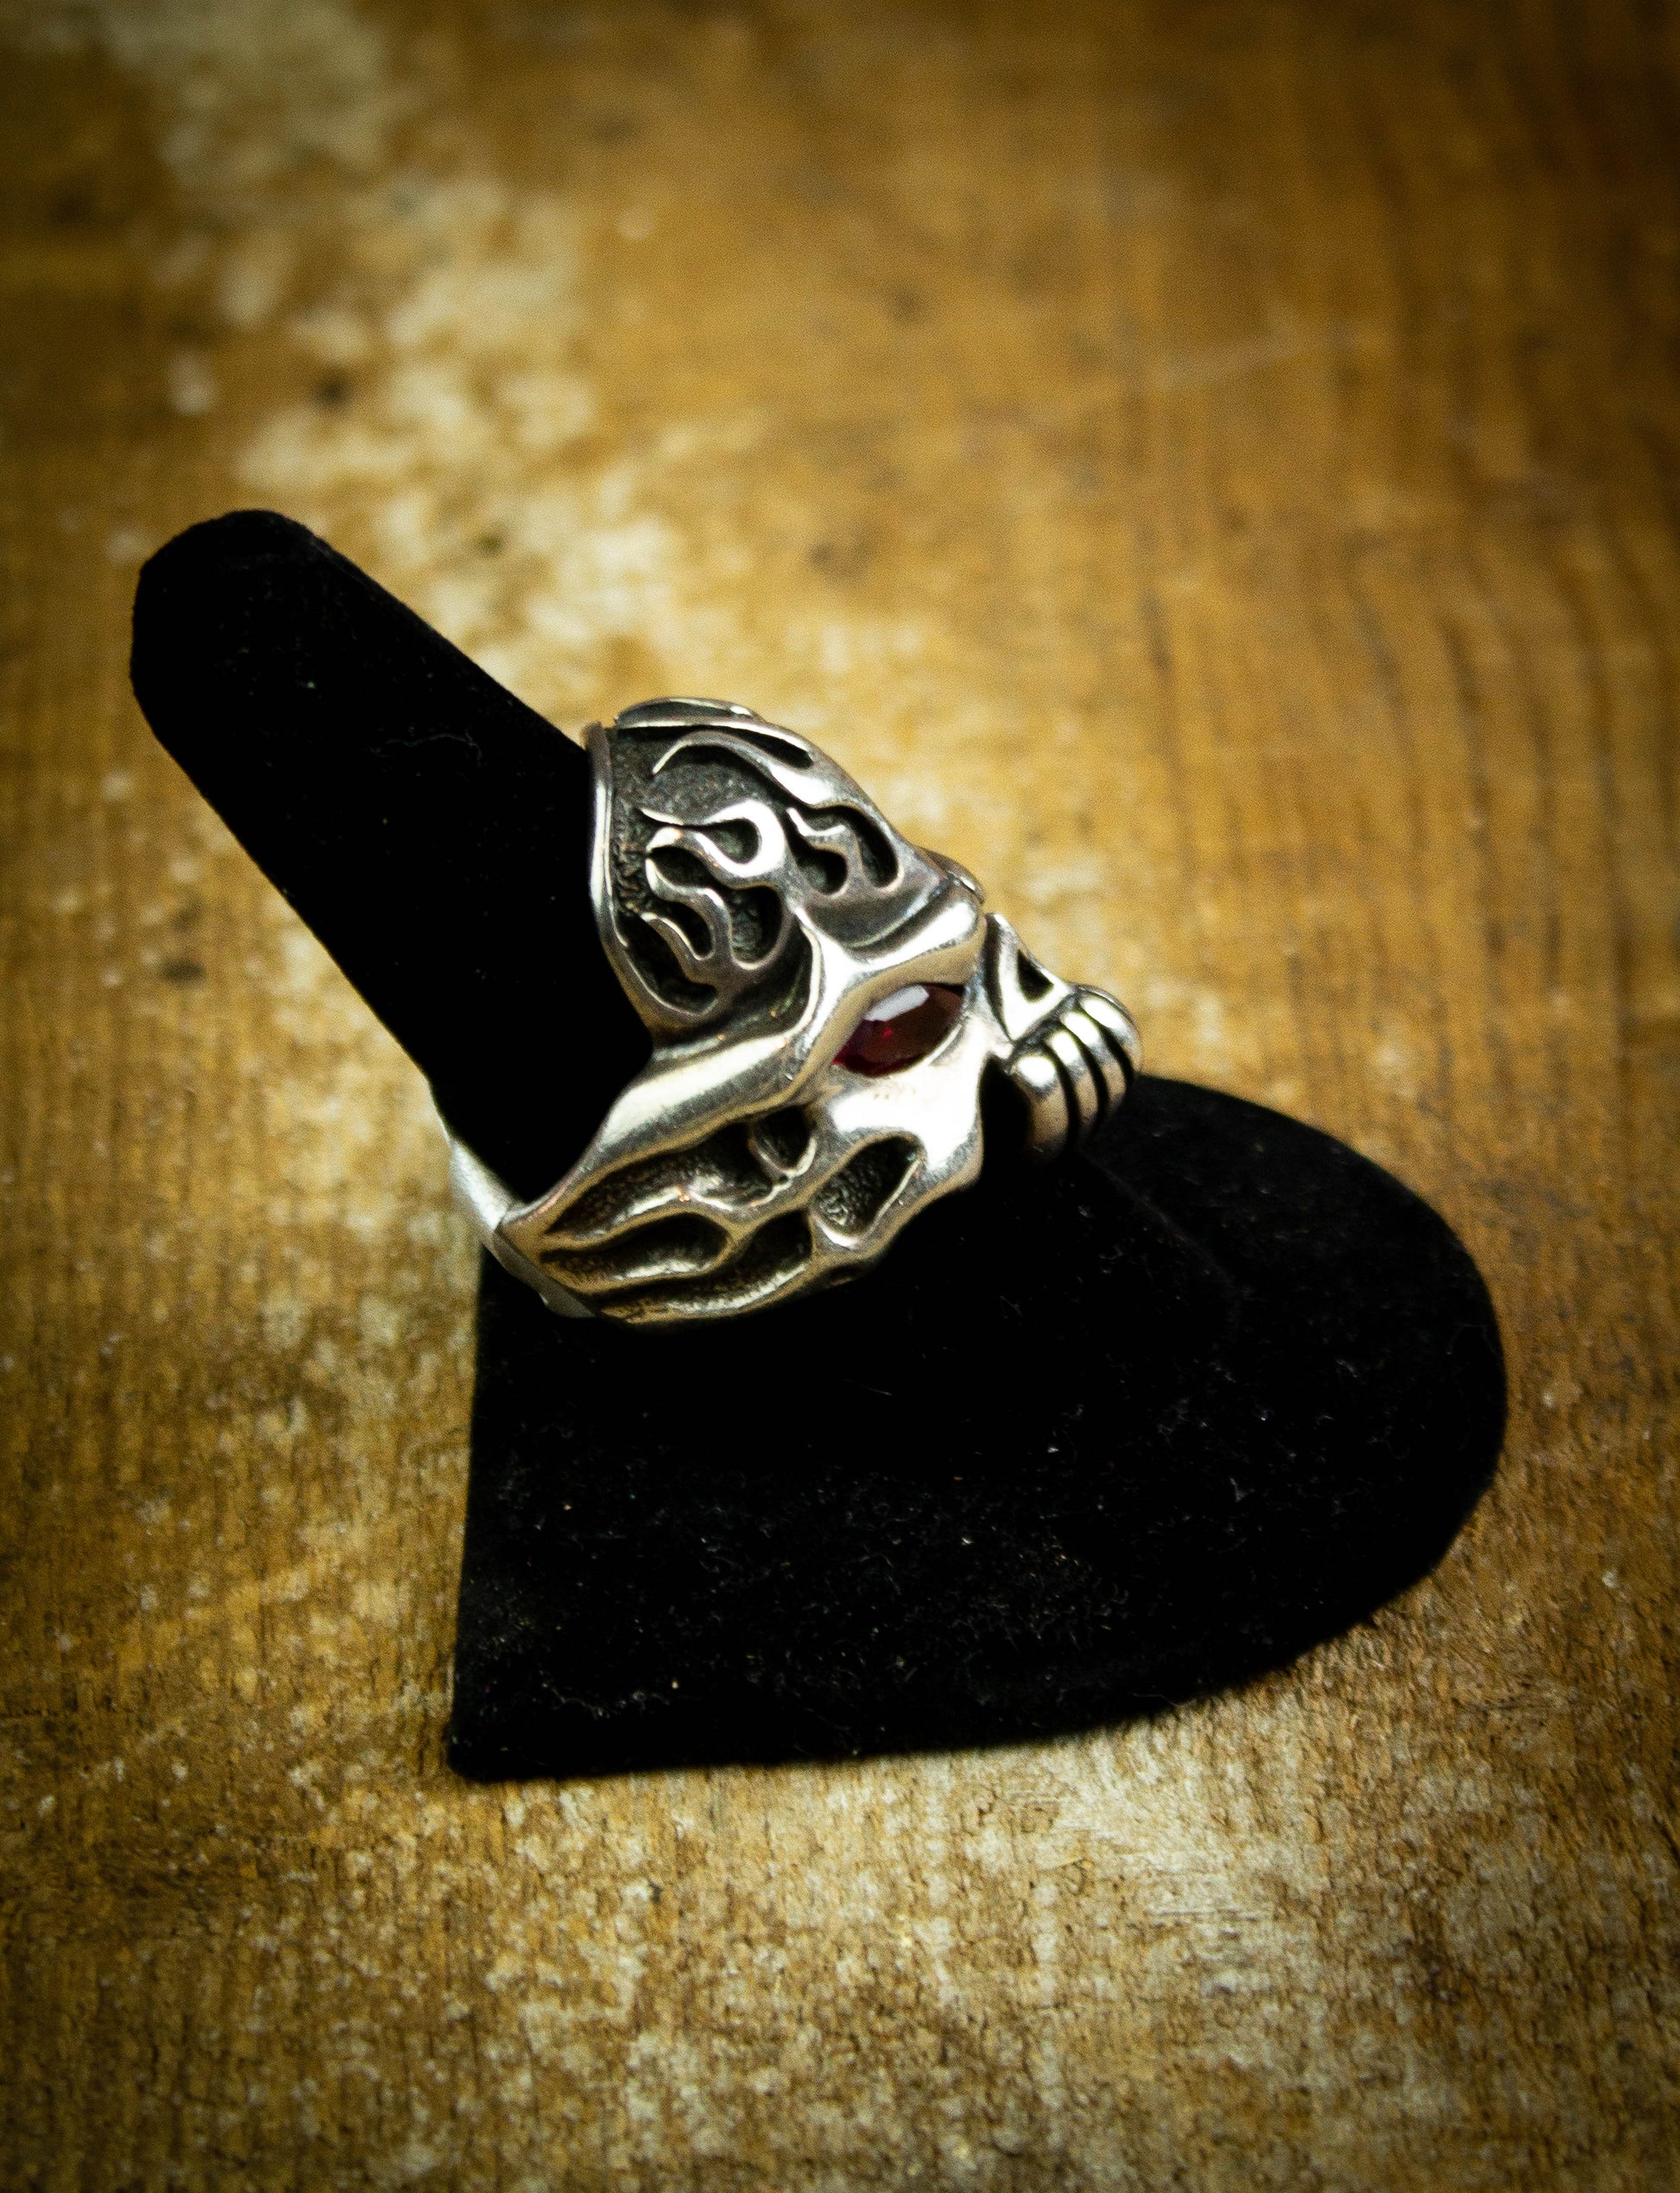 Sterling Silver Flaming Half Skull Ring With Garnet Eyes 925 Size 9.5